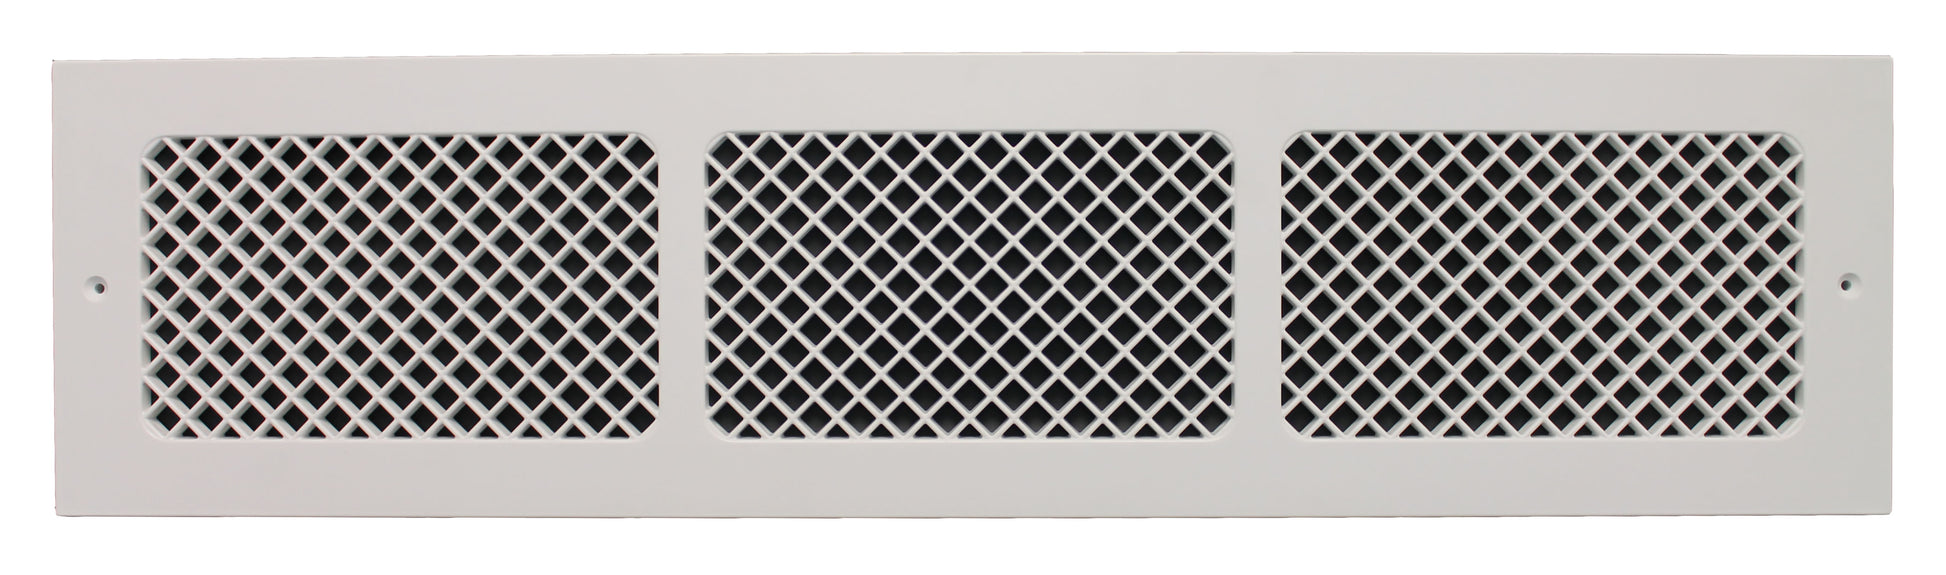 Contemporary style decorative baseboard vent cover with the dimensions 6" in x 30" in